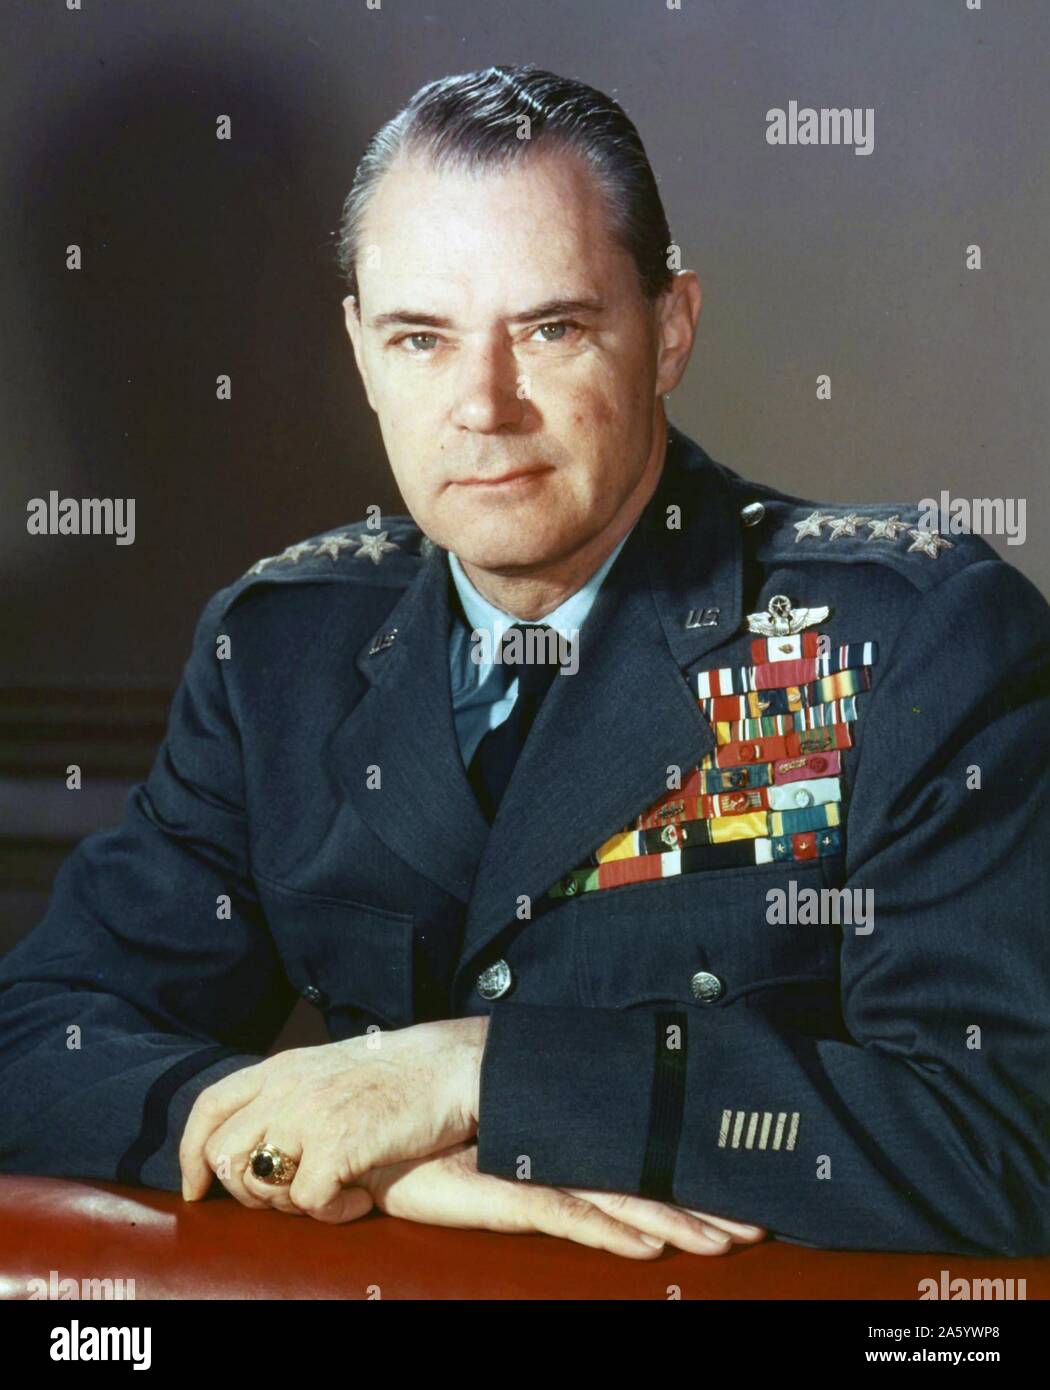 Hoyt S. Vandenberg (1899 – 1954). Air Force general, Chief of Staff, and second Director of Central Intelligence. During World War II, Vandenberg was the commanding general of the Ninth Air Force, a tactical air force in England and in France, supporting the Army, from August 1944 until V-E Day. Vandenberg Air Force Base on the central coast of California is named for General Vandenberg. In 1946, he was briefly the U.S. Chief of Military Intelligence. Stock Photo